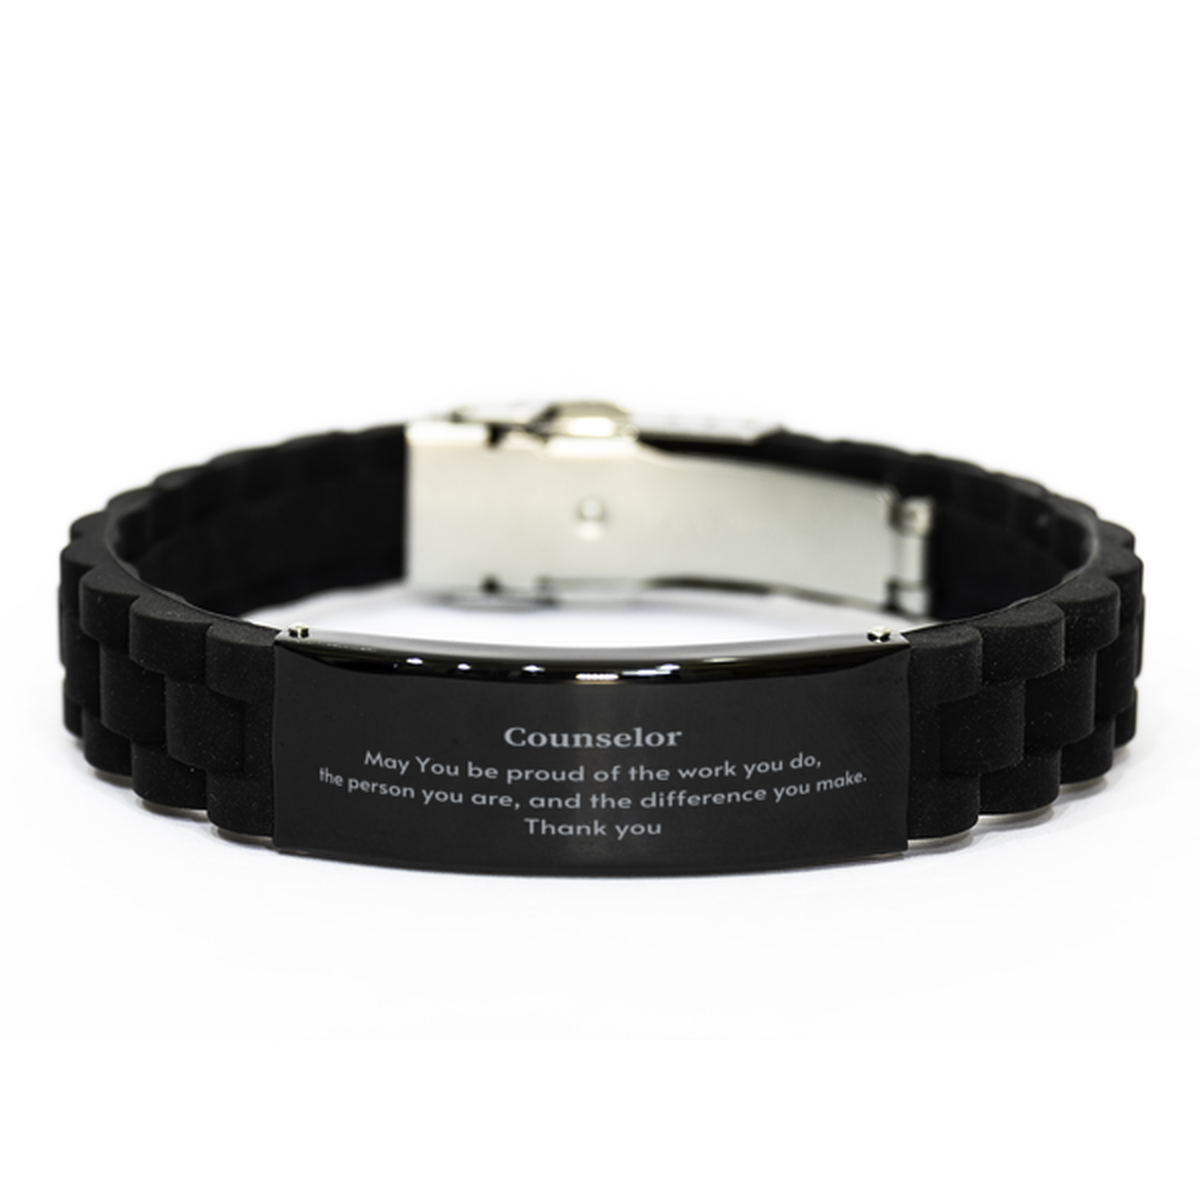 Heartwarming Black Glidelock Clasp Bracelet Retirement Coworkers Gifts for Counselor, Counselor May You be proud of the work you do, the person you are Gifts for Boss Men Women Friends